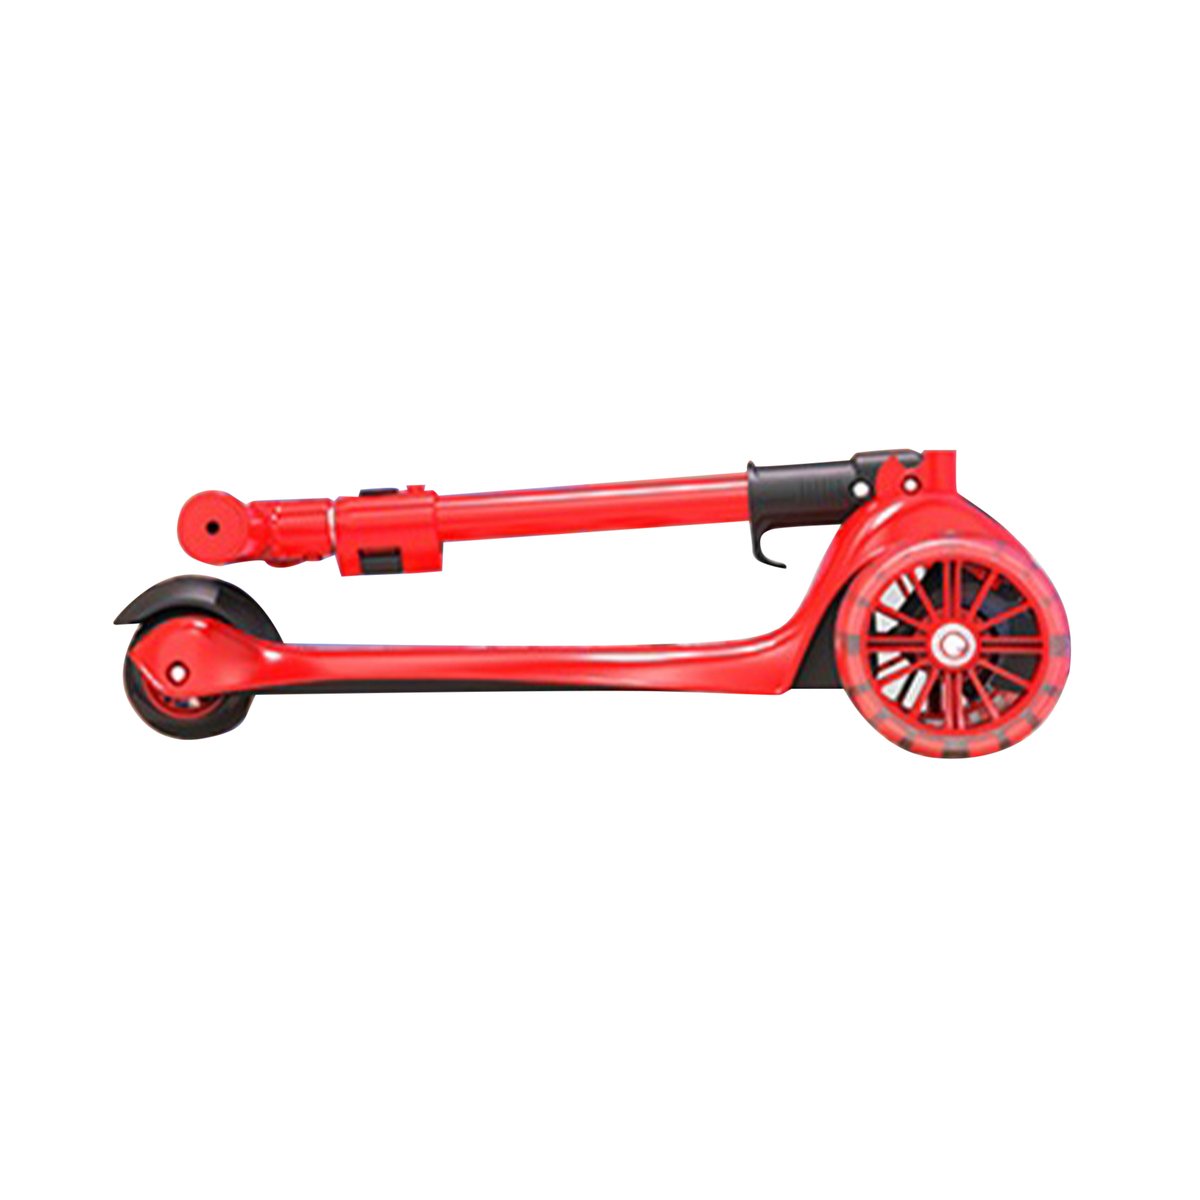 Skid Fusion Kick Scooter 3Wheel S949 Red